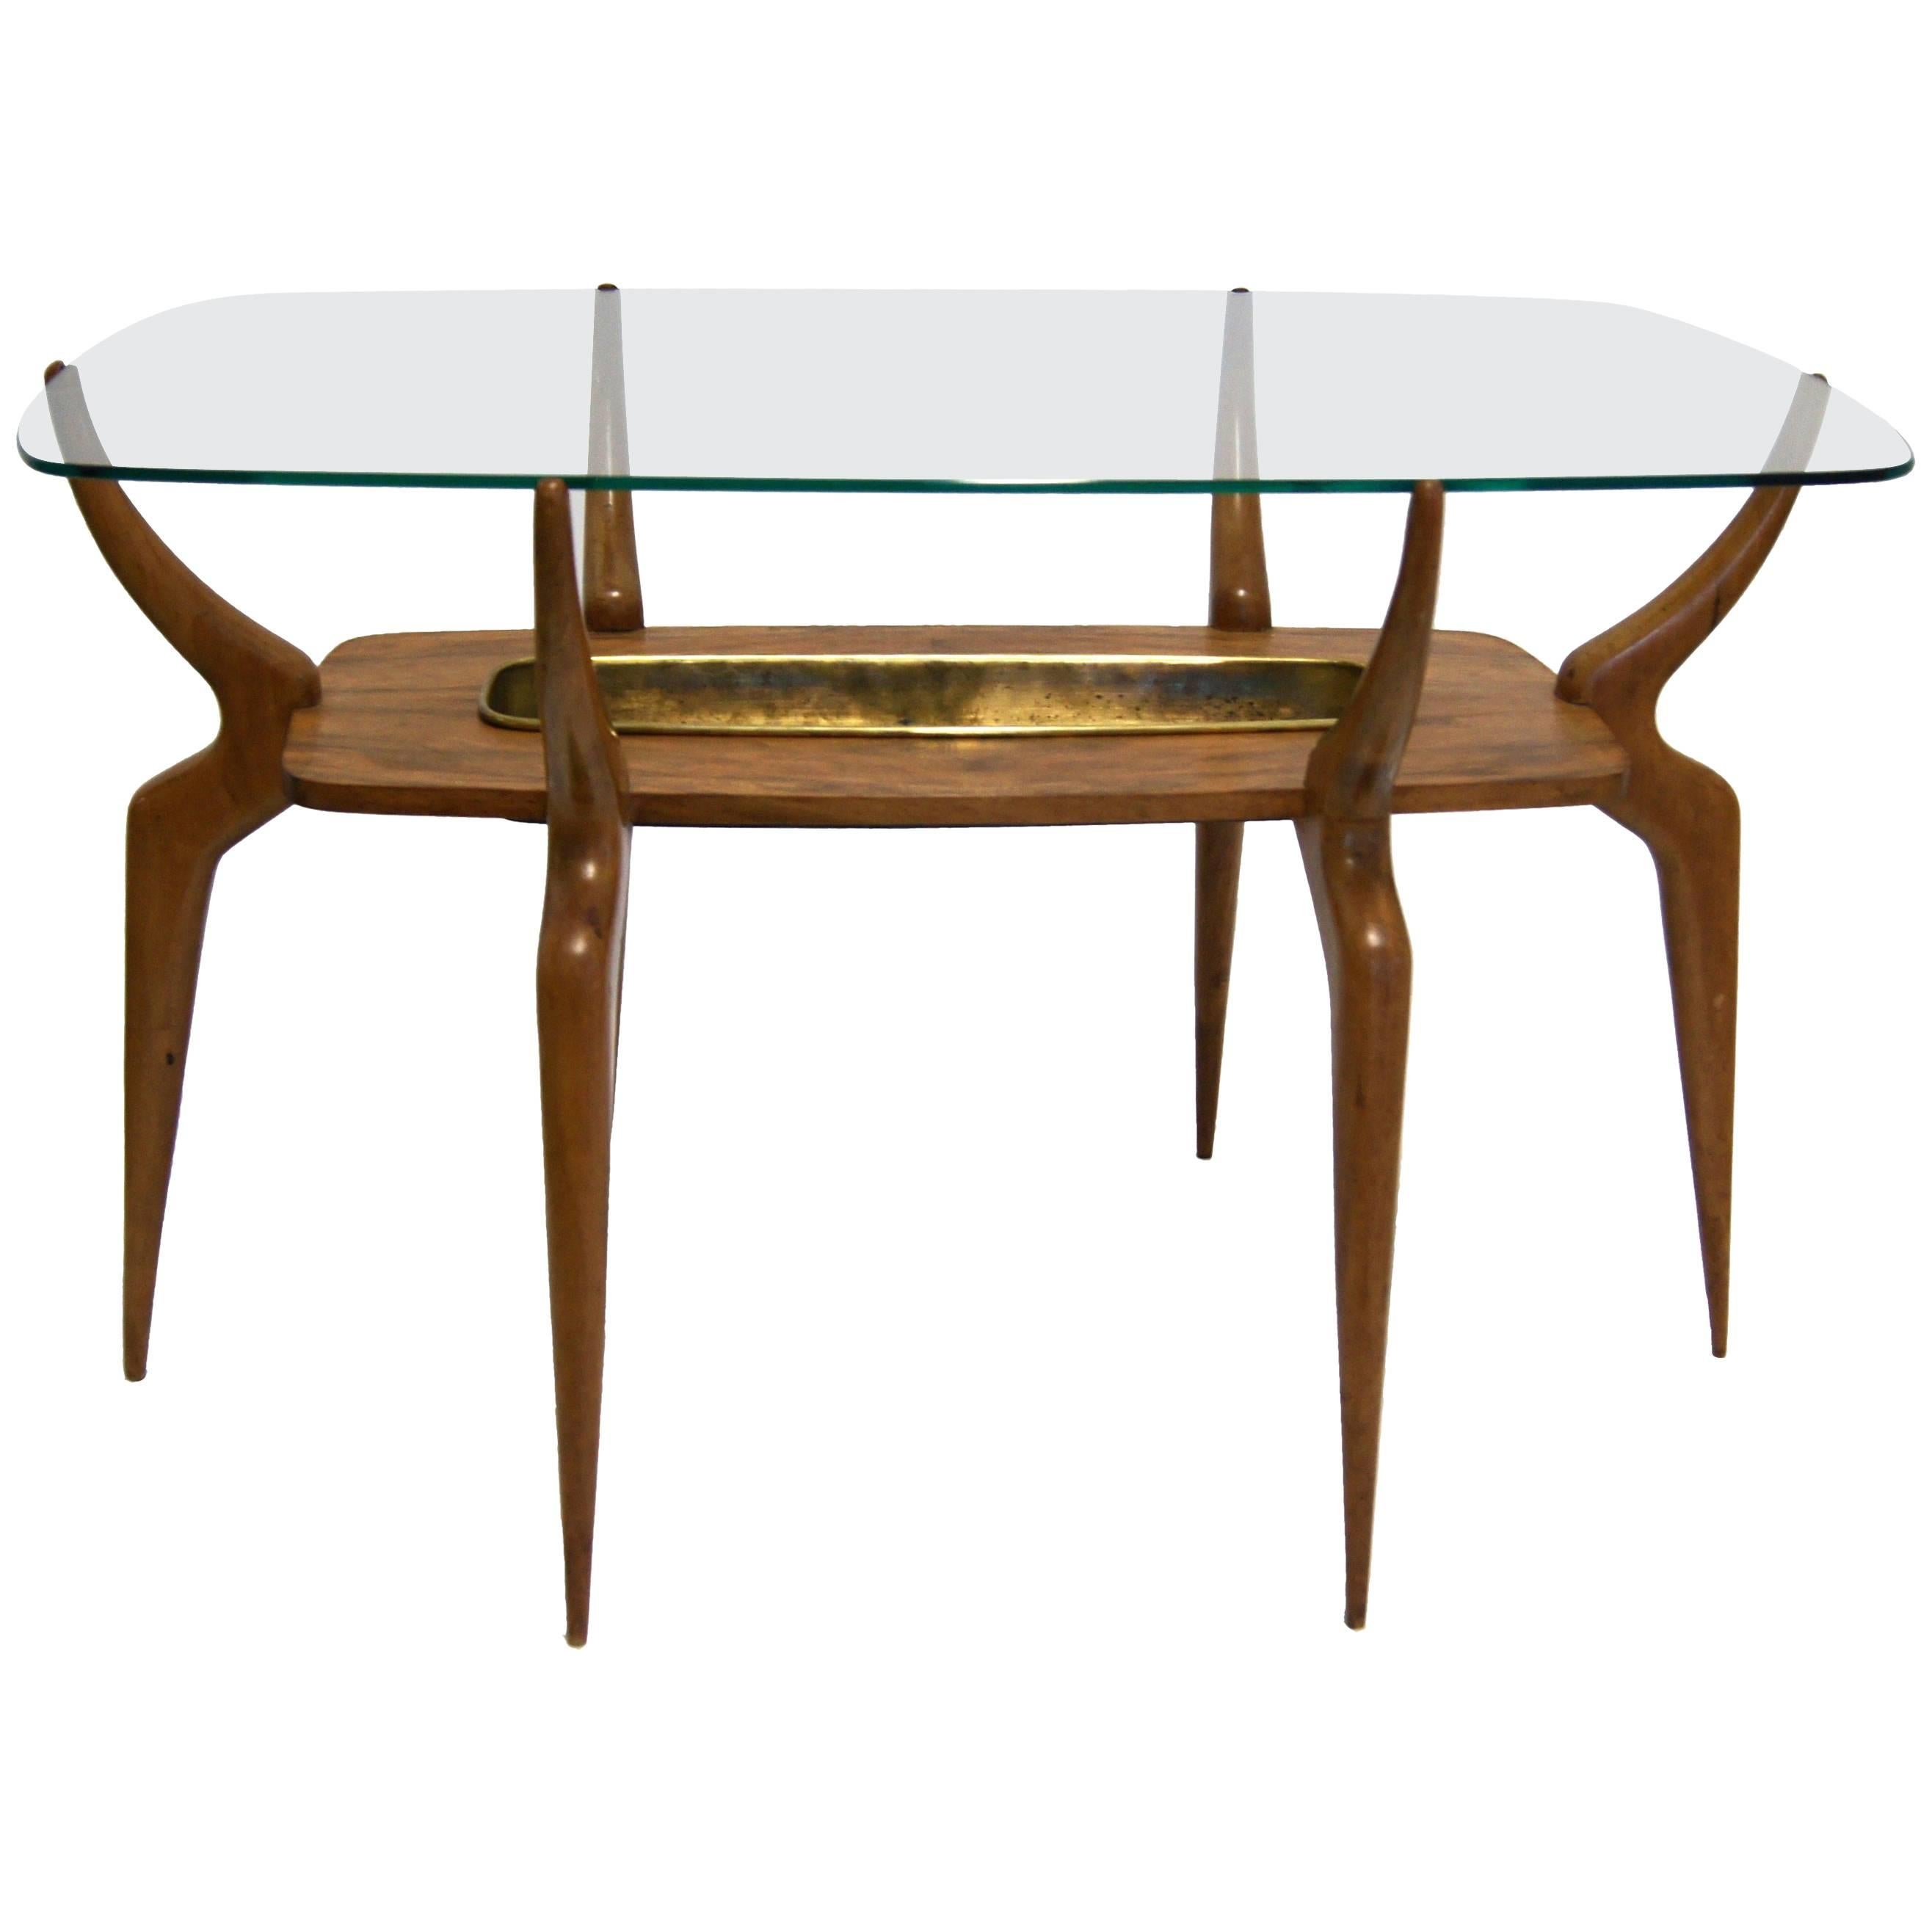 Italian Spider-Leg Cocktail Table Attributed to Ico Parisi